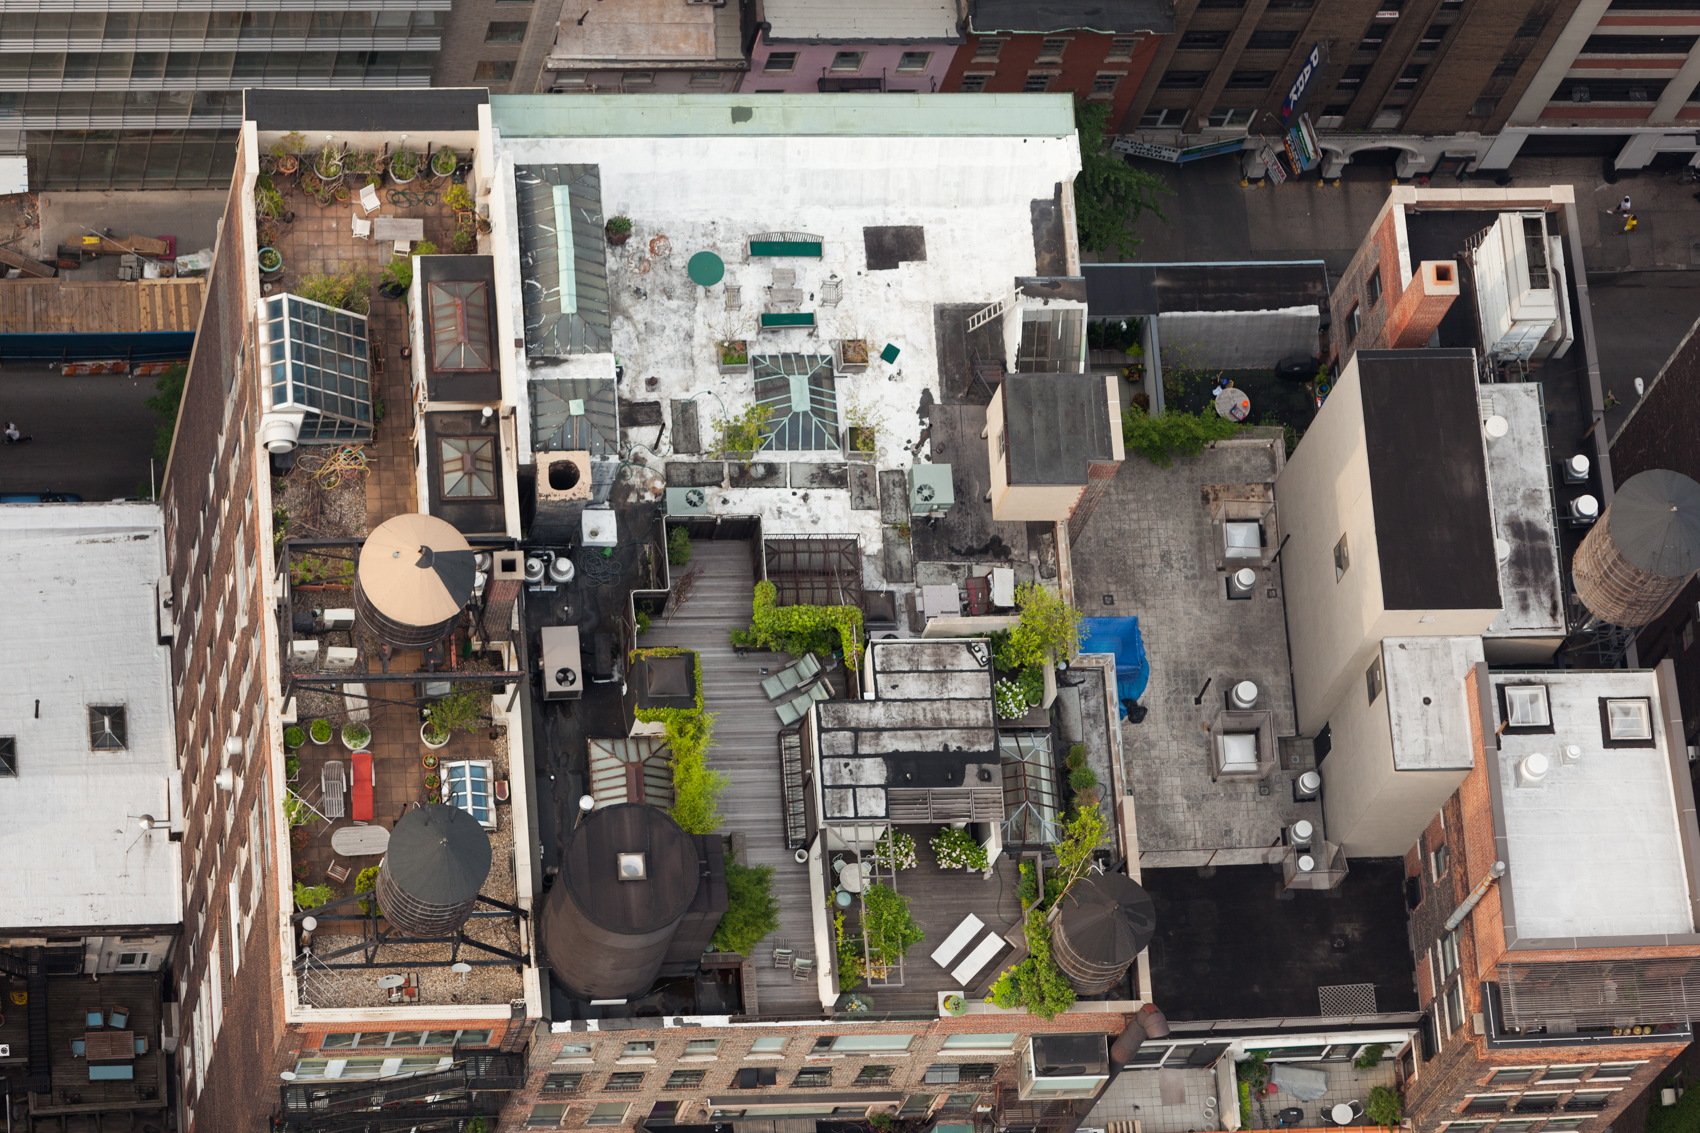 12 E 12th St, East Village, Manhattan, NY, 10003, 40.734066,-73.993769, LOCATION: Contiguous apartment buildings with different rooftop build-outs.  Wood decking and tiles are used to protect the roof's waterproof membrane. No such protection appears on the white roof in the back.